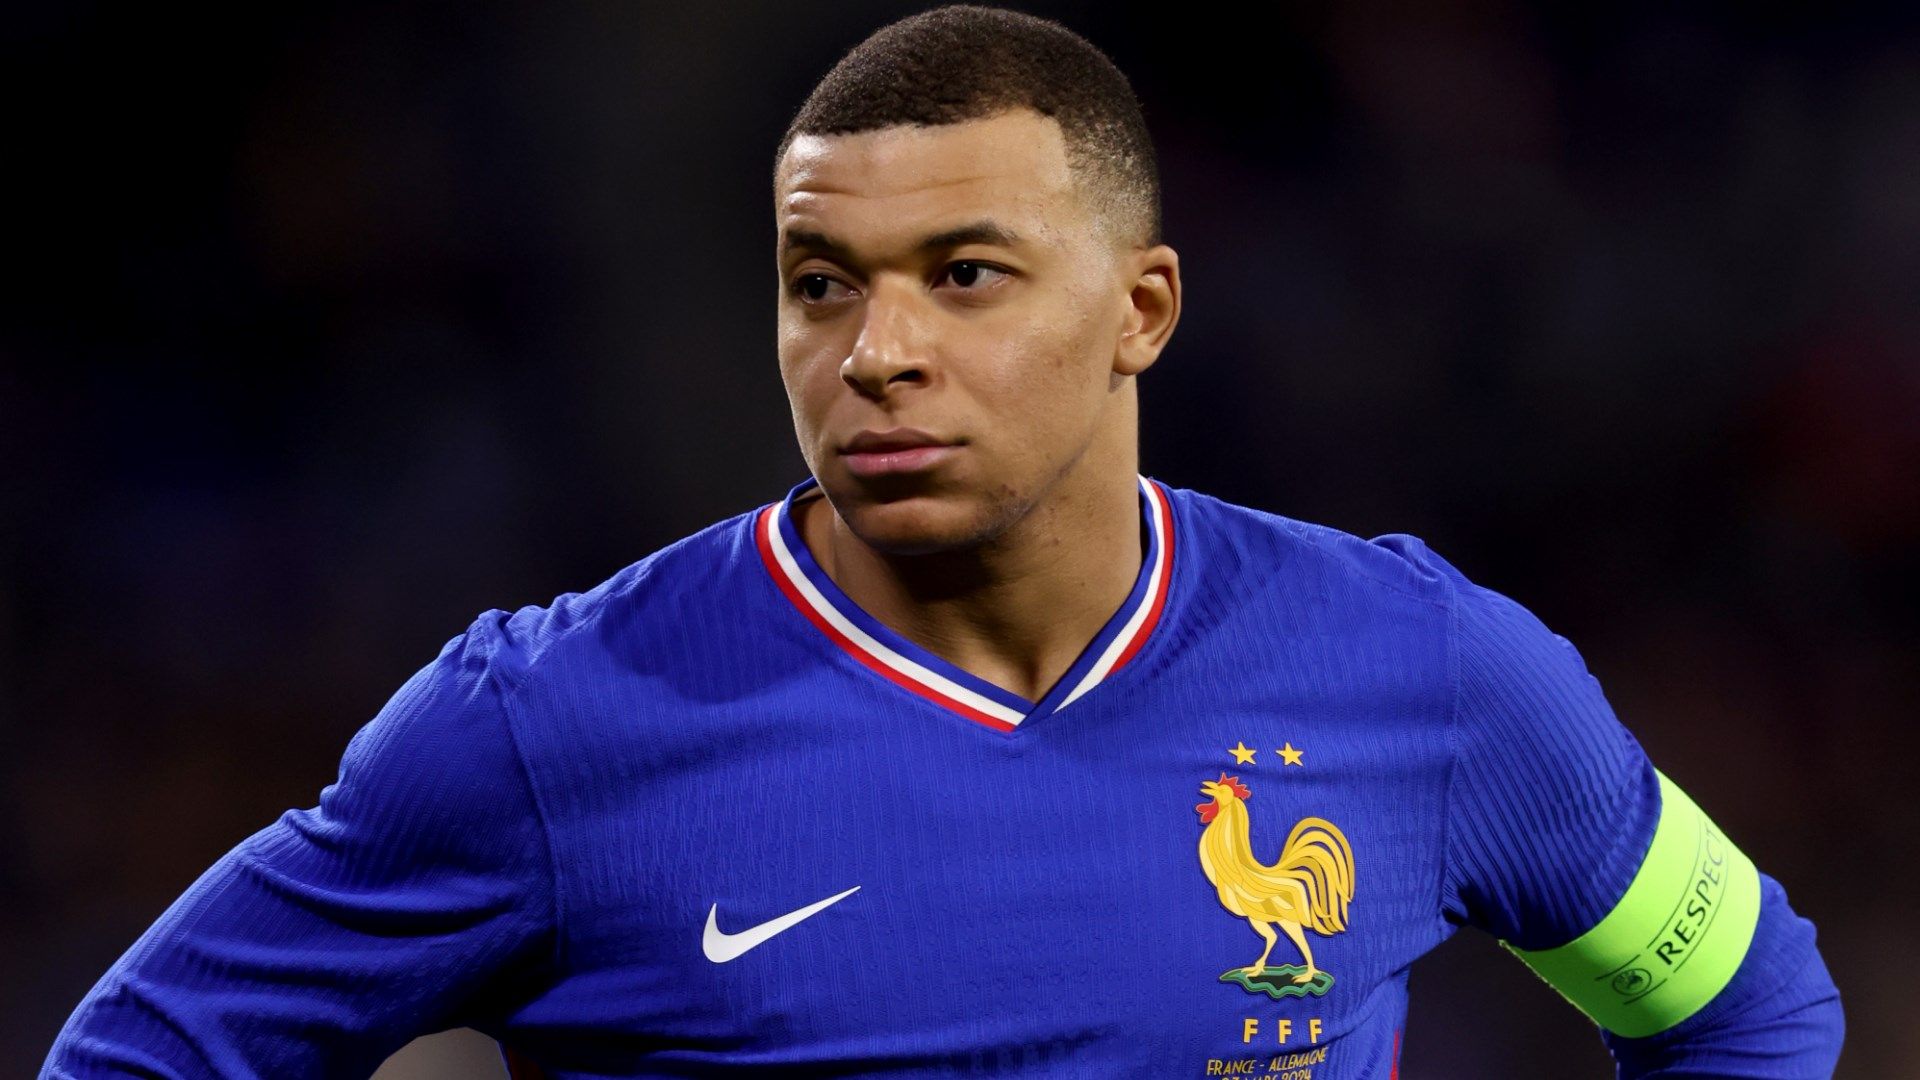 Emmanuel Macron hopeful Kylian Mbappe will play at 2024 Olympics as French president responds to Real Madrid question